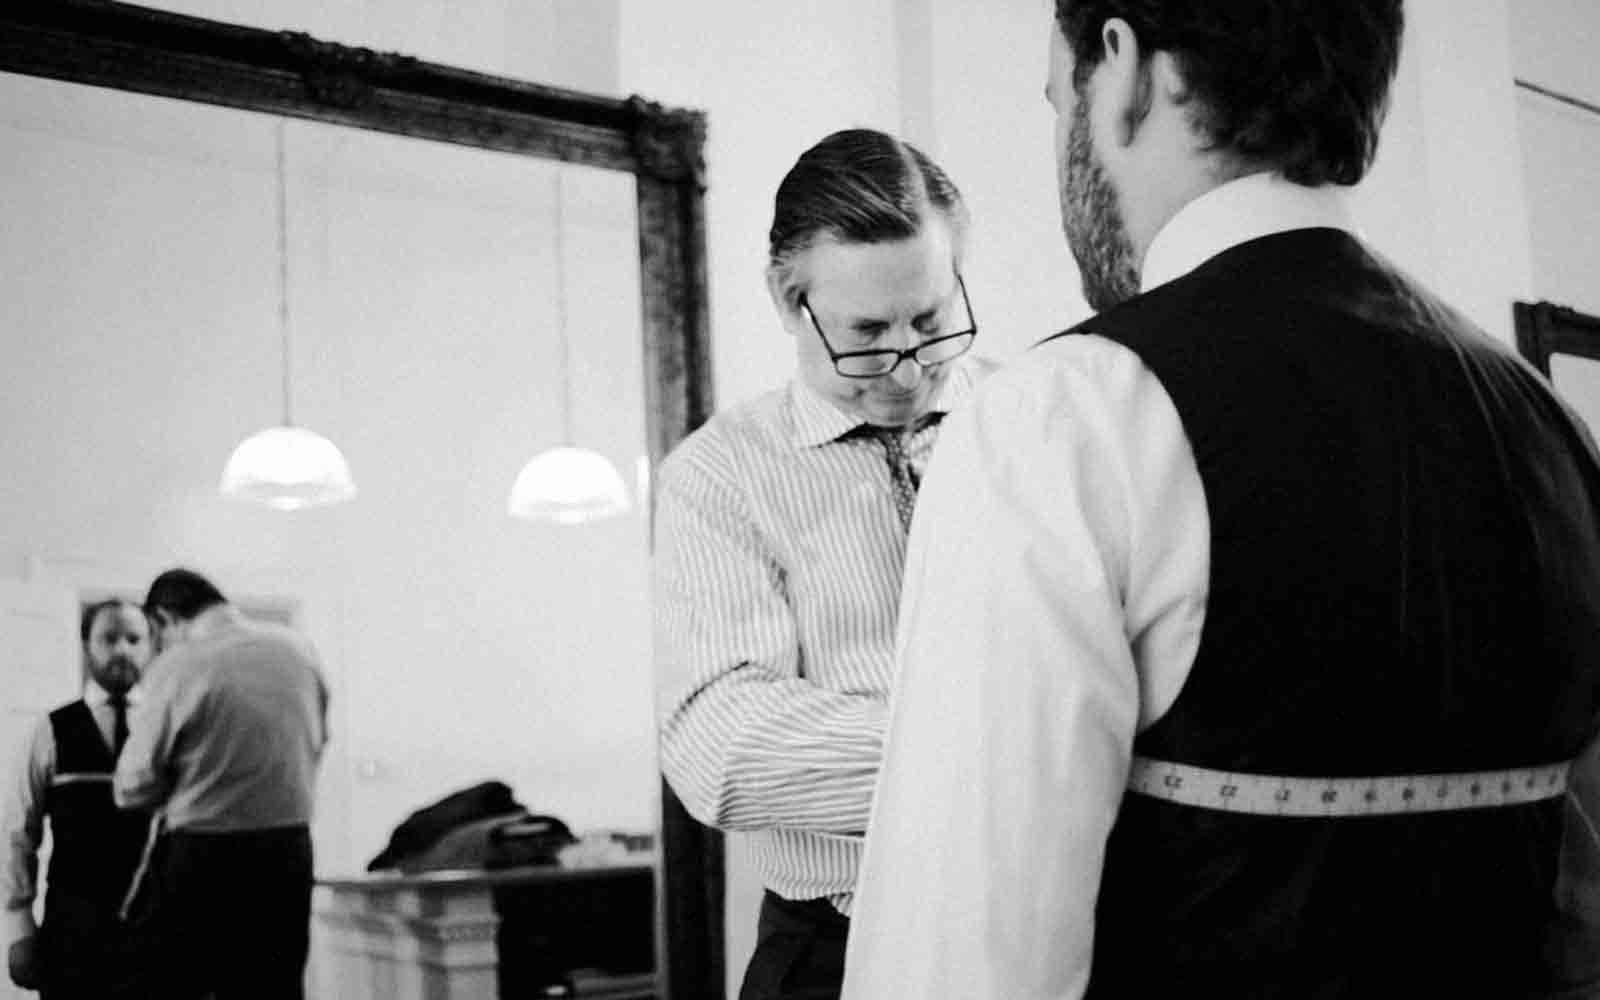 man getting chest measured at a tailor